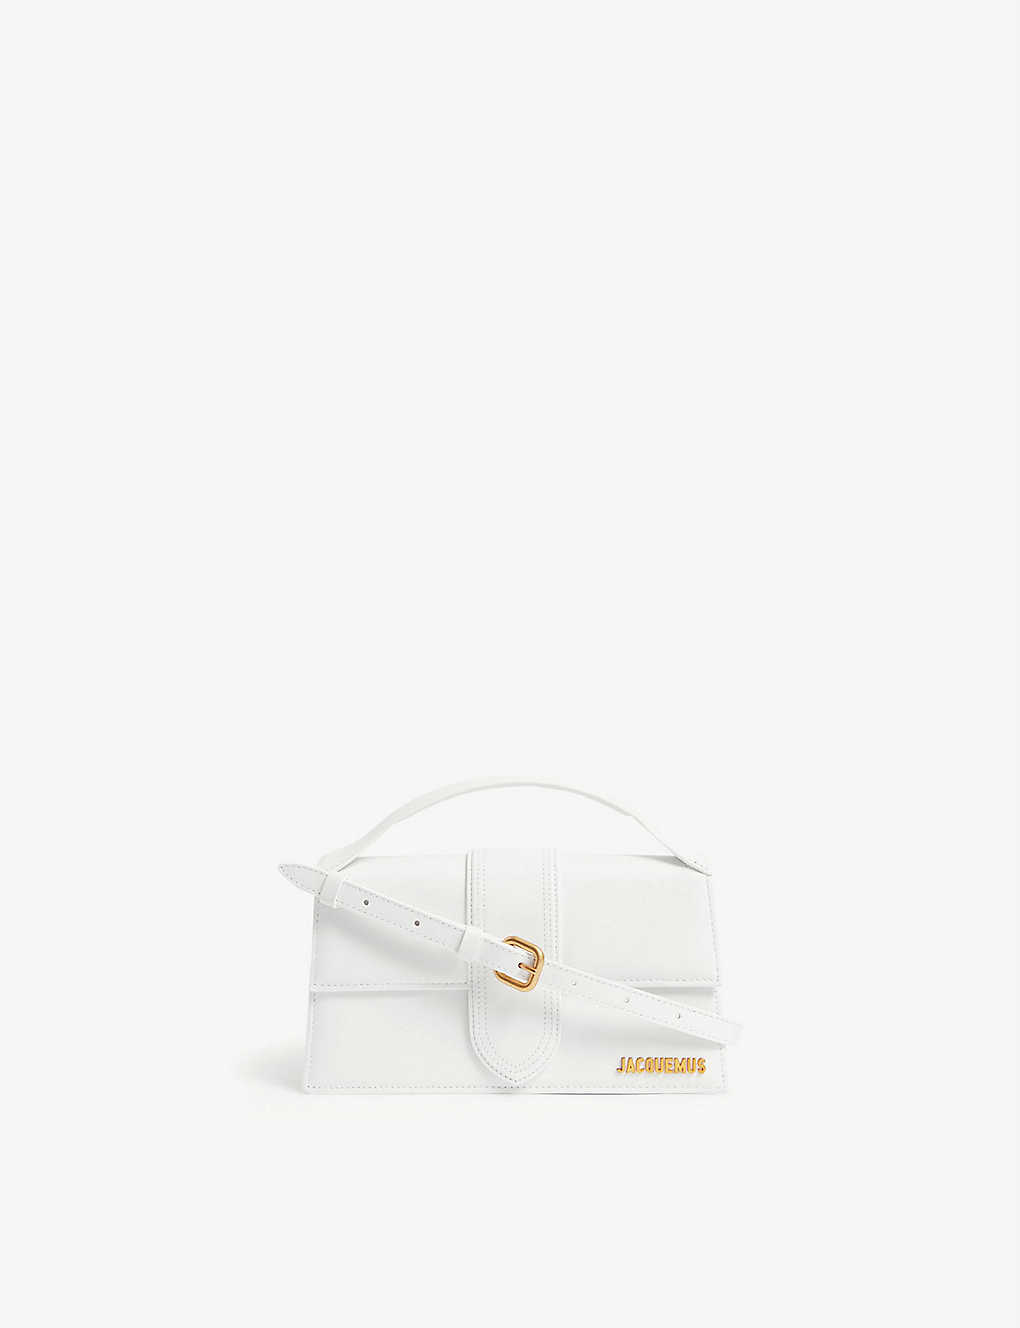 Jacquemus Le Grand Bambino Leather Top Handle Bag In White